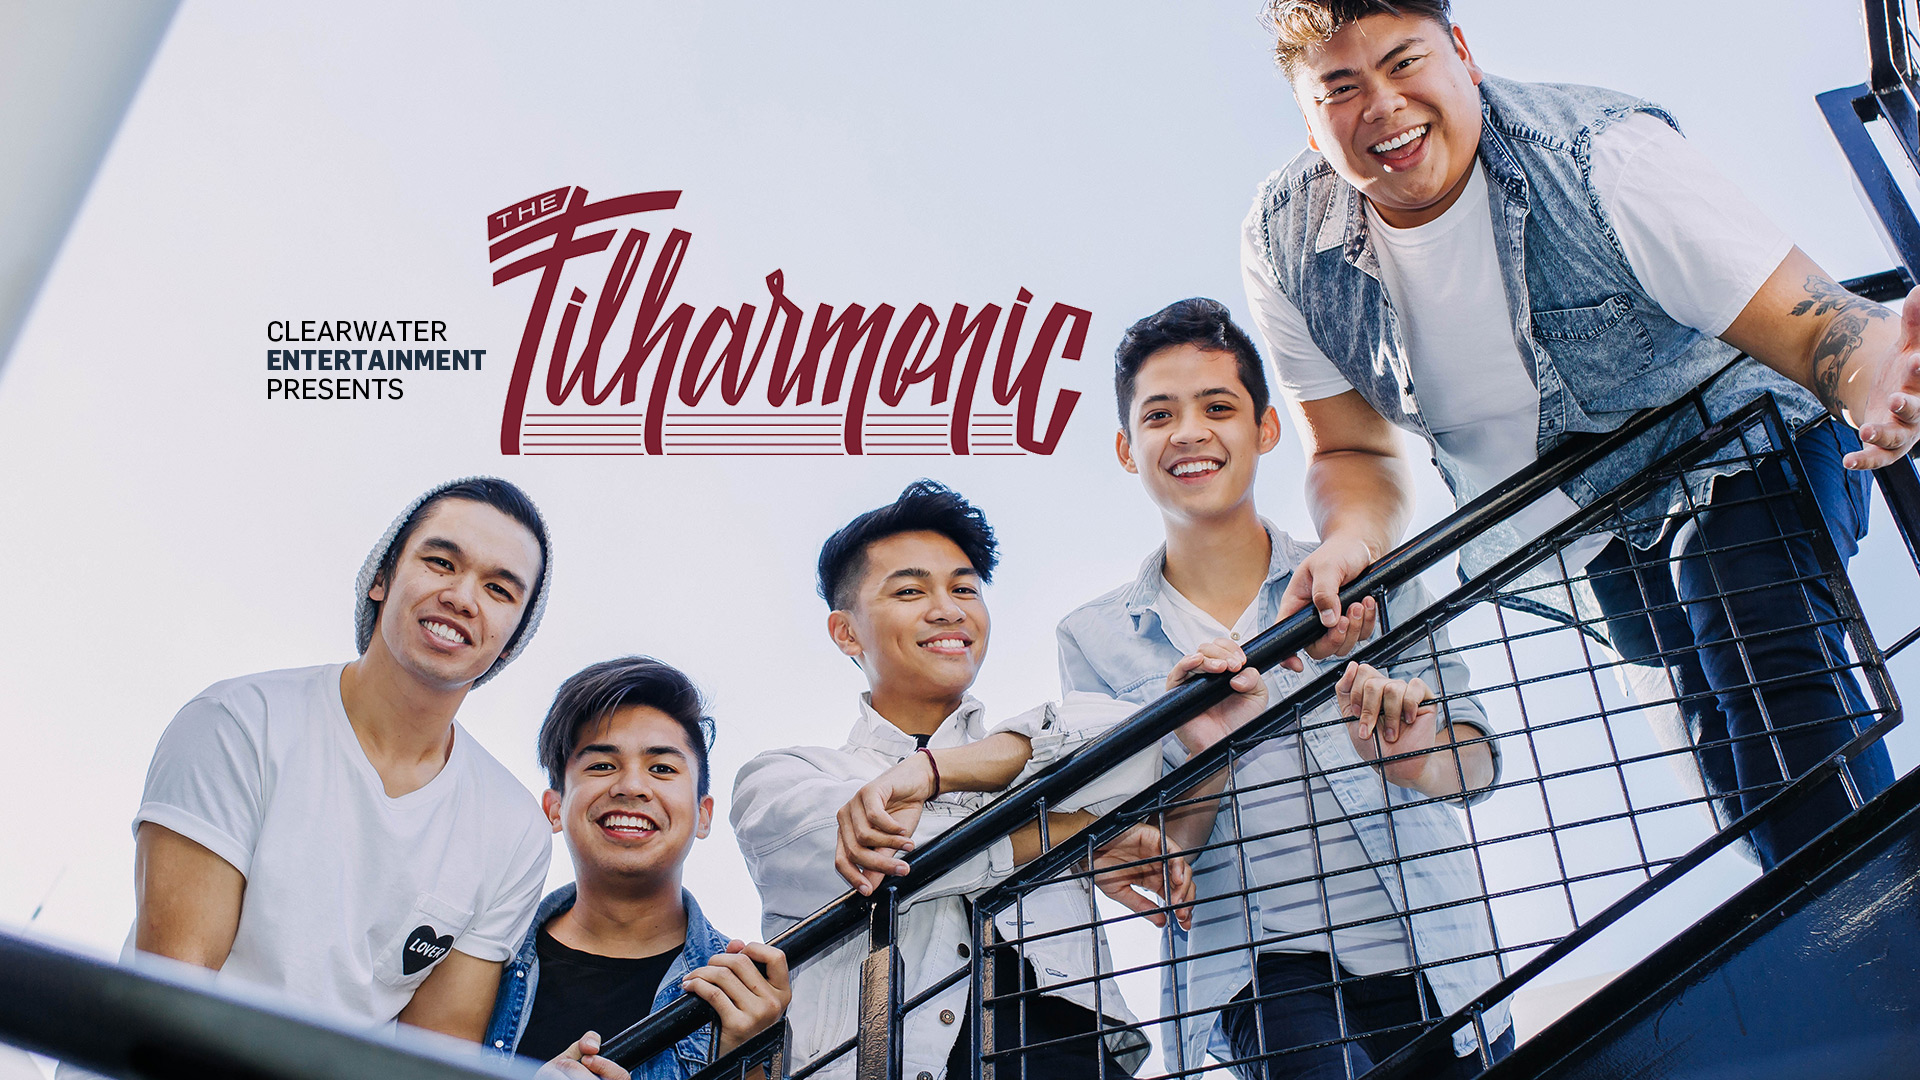 The Filharmonic at Clearwater Casino Resort